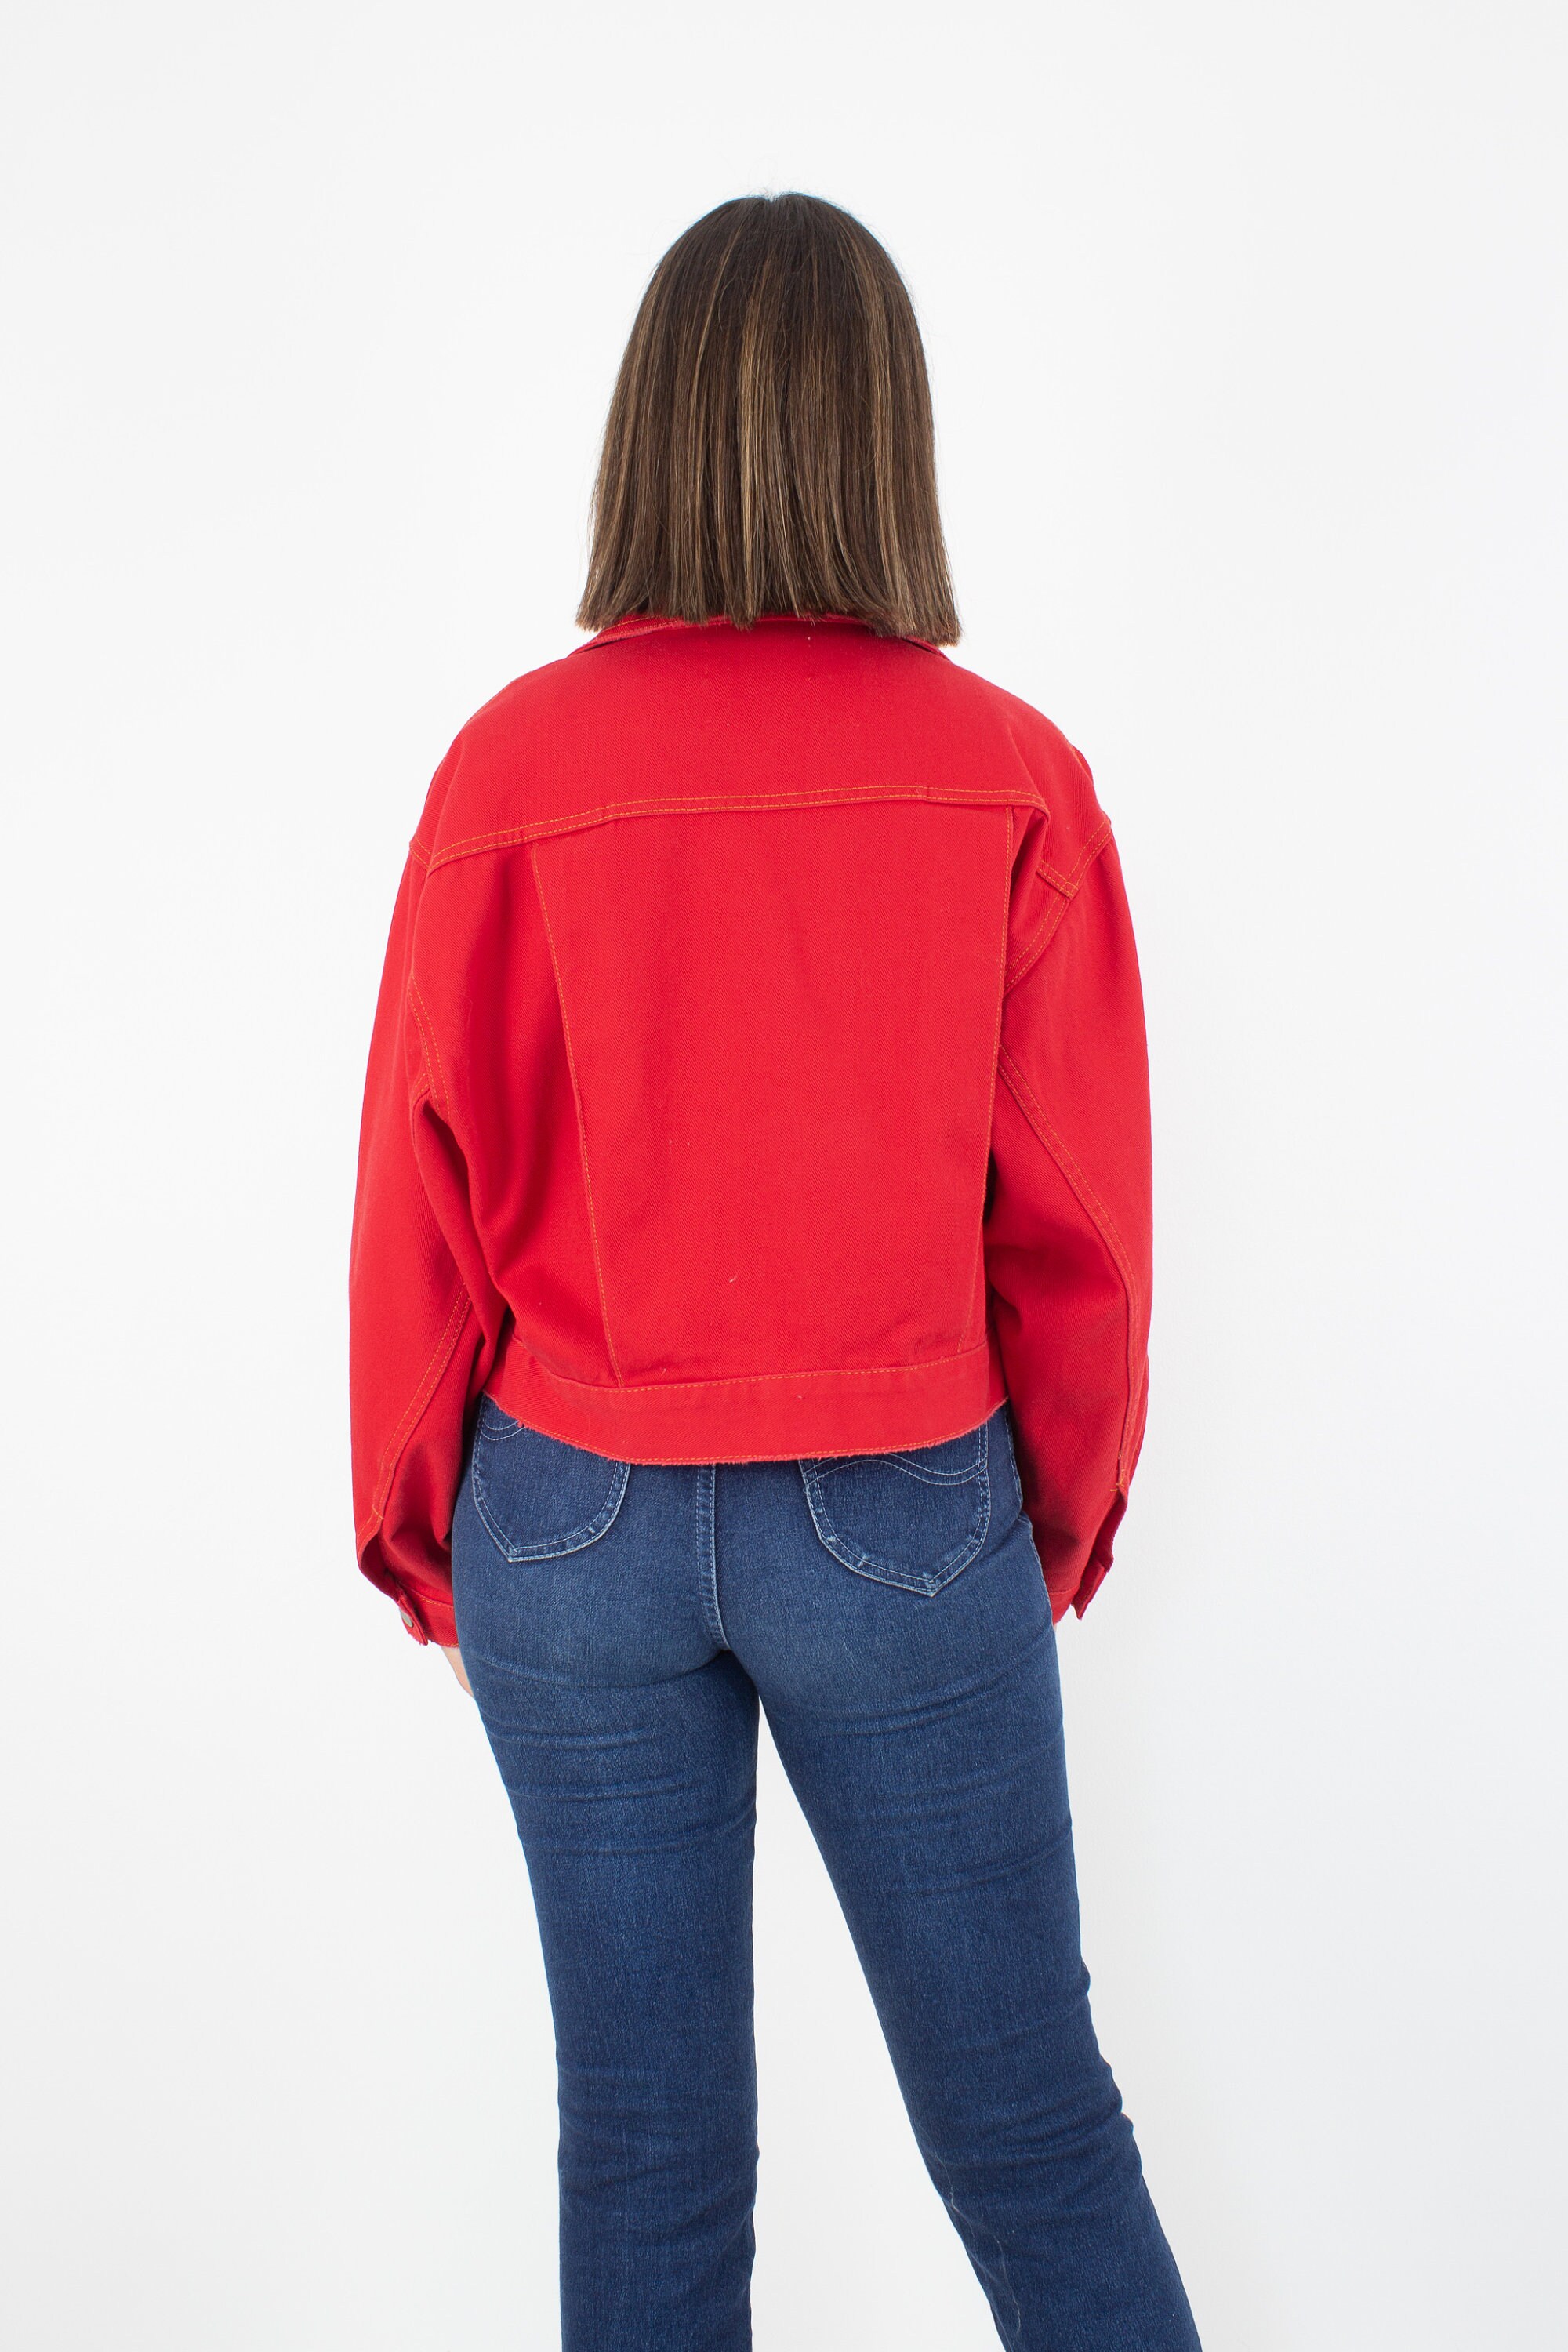 80s 1980s Bright Red Cropped Denim Jacket Free Size XS/S/M/L - Etsy